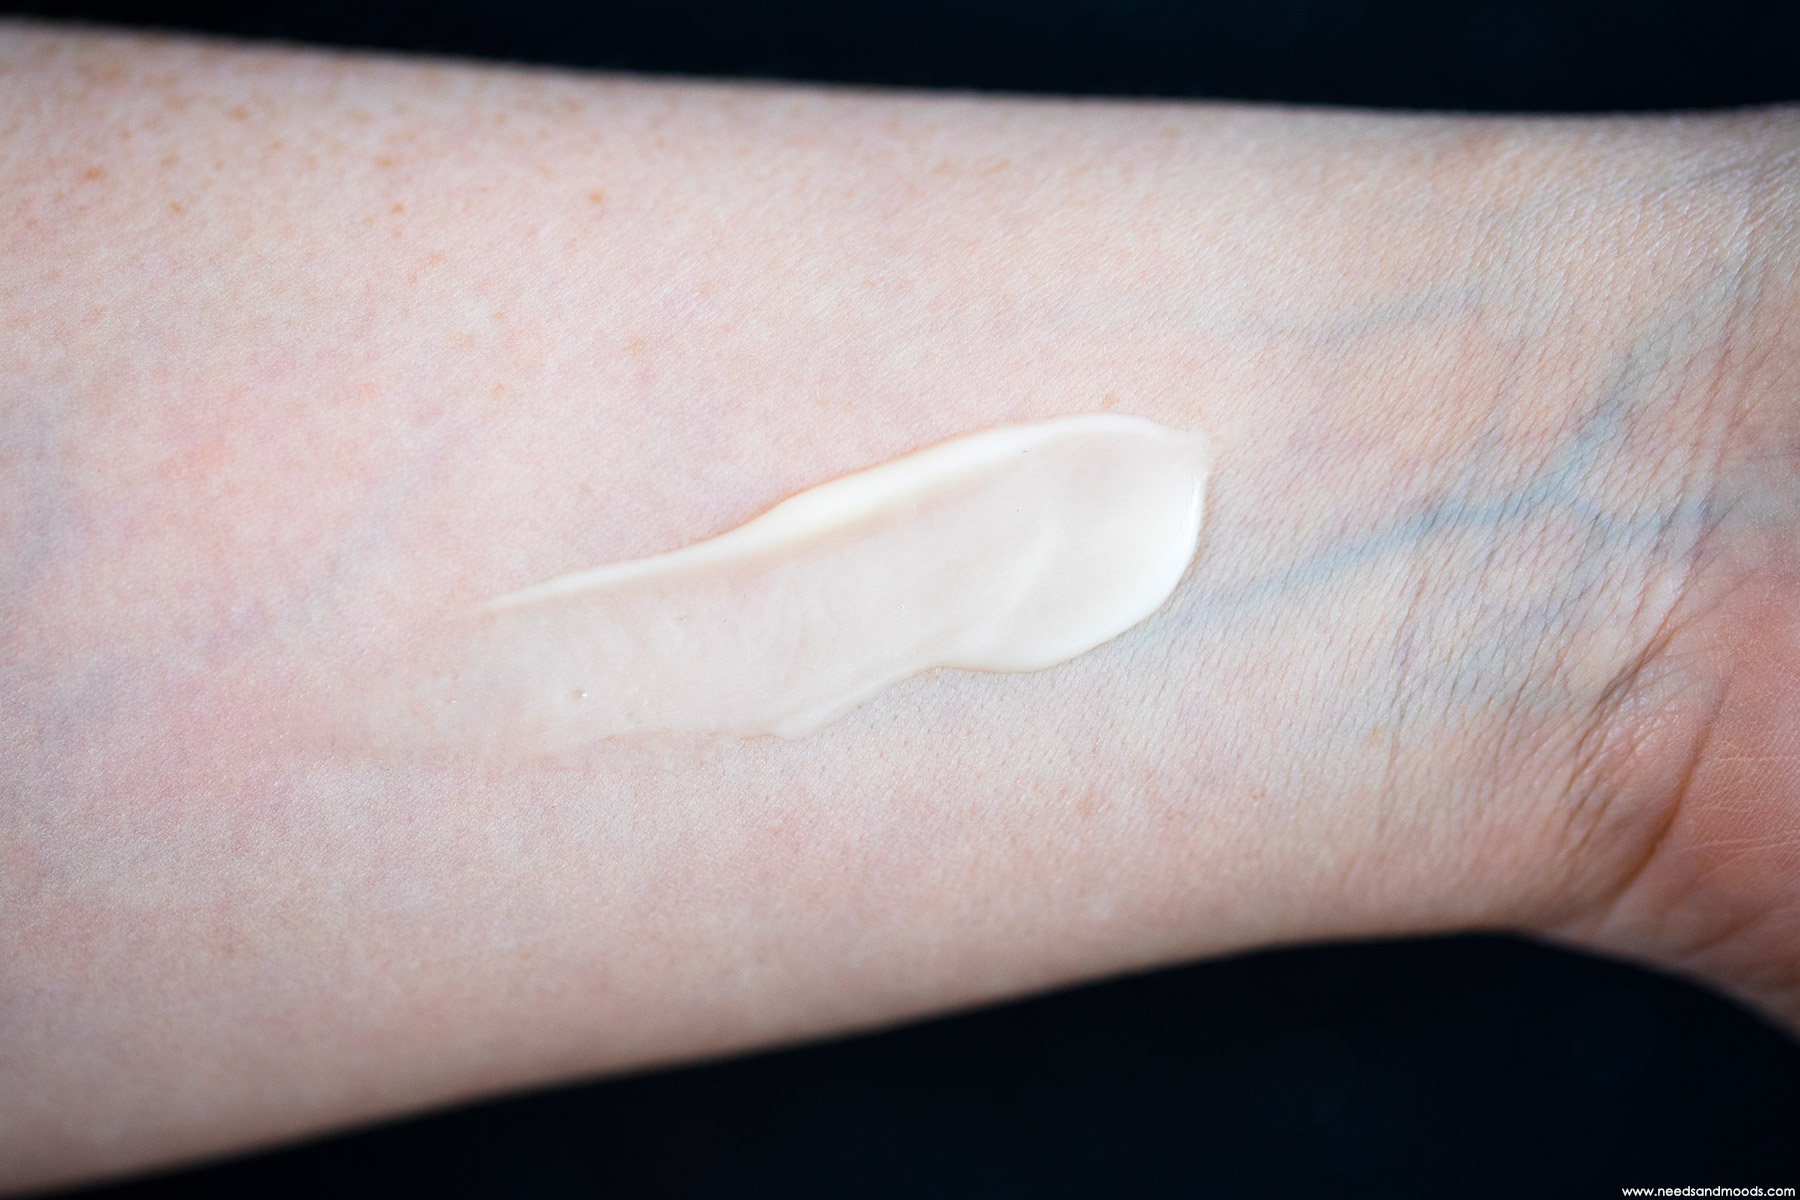 clinique fit hydratant matifiant post effort swatch